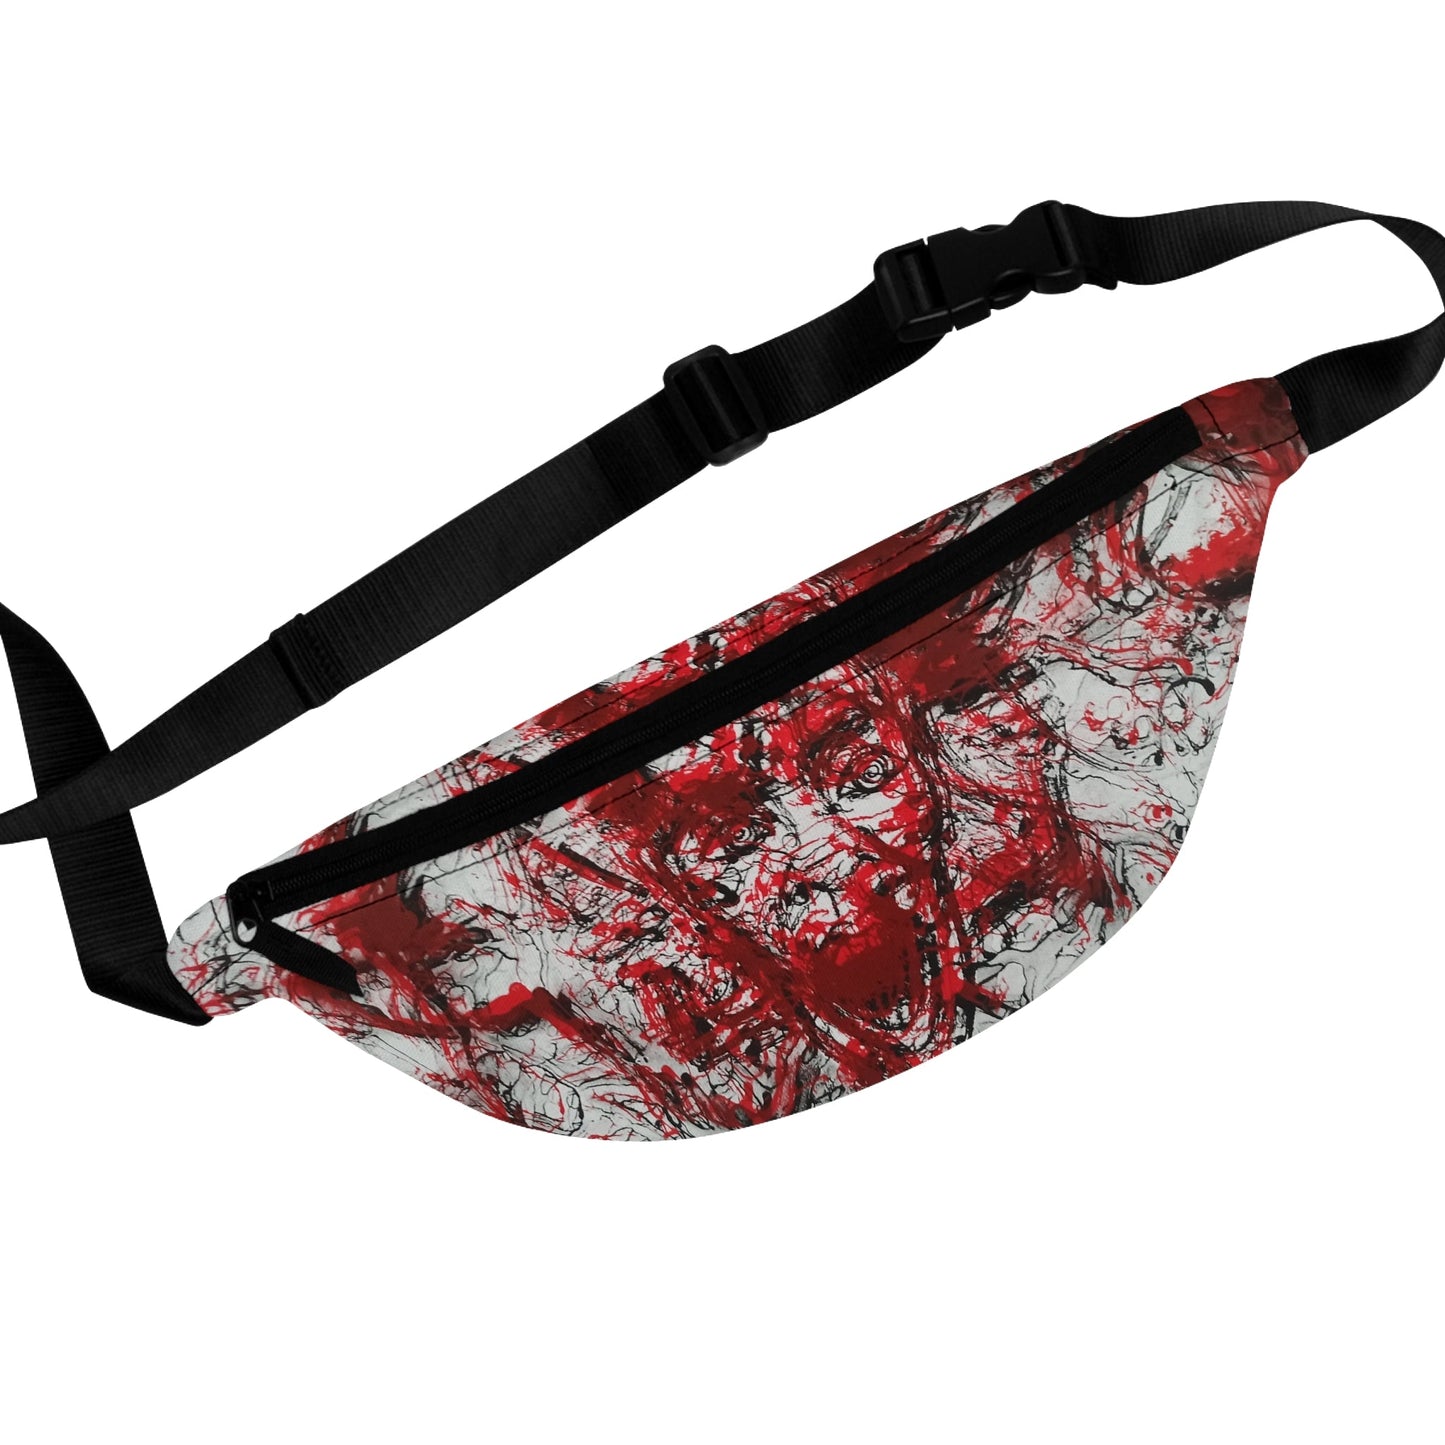 "The scream" Fanny Pack - Red - MateART